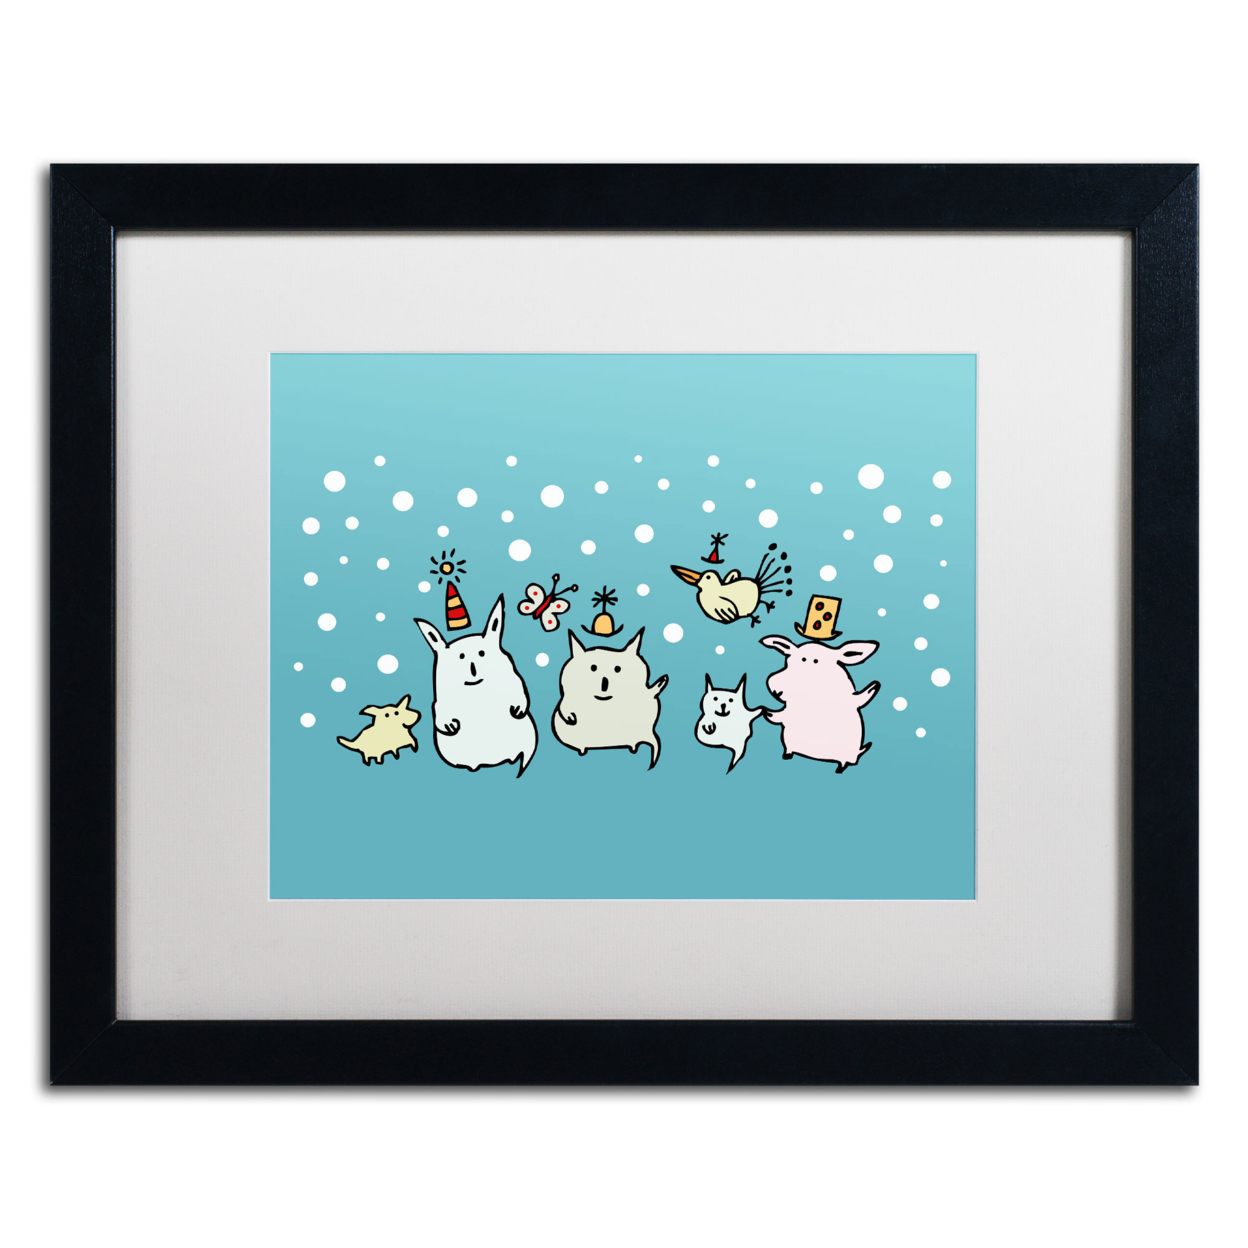 Carla Martell 'Christmas Creatures In Blue' Black Wooden Framed Art 18 X 22 Inches